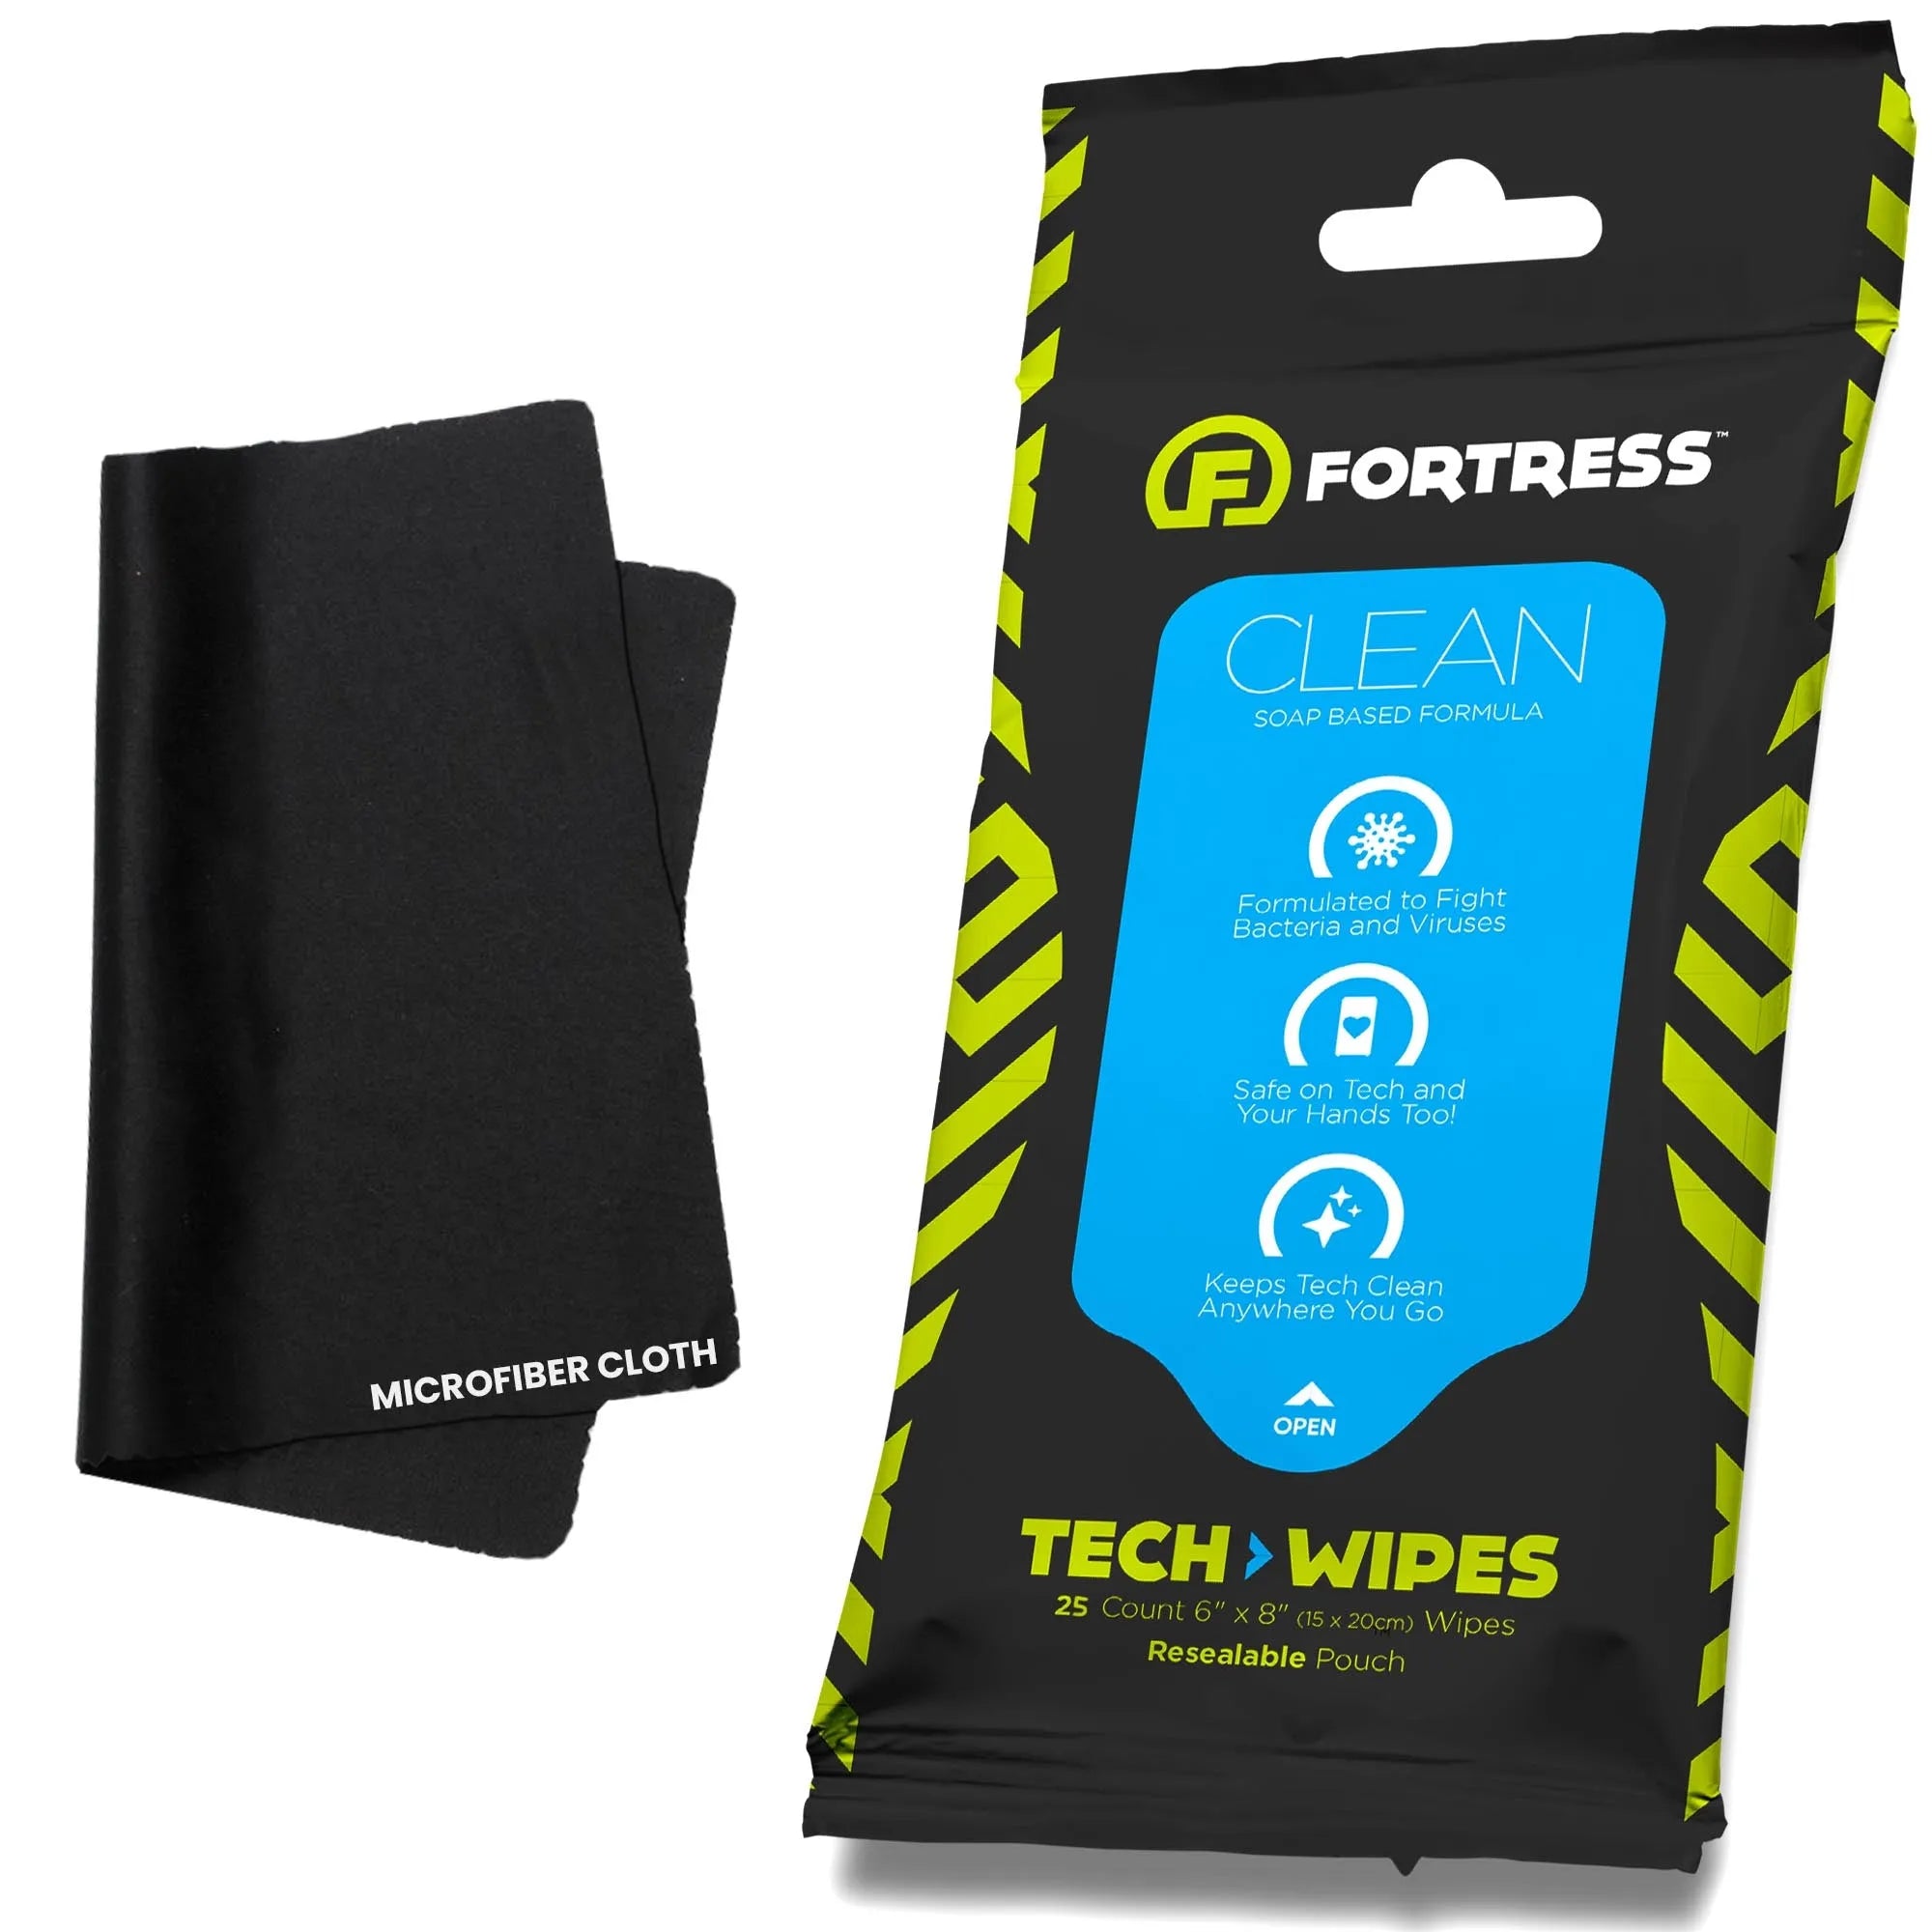 Fortress Tech Wipes (25 ct.) To-Go Disinfecting Wipes for Smartphones SingleYes Scooch Clean